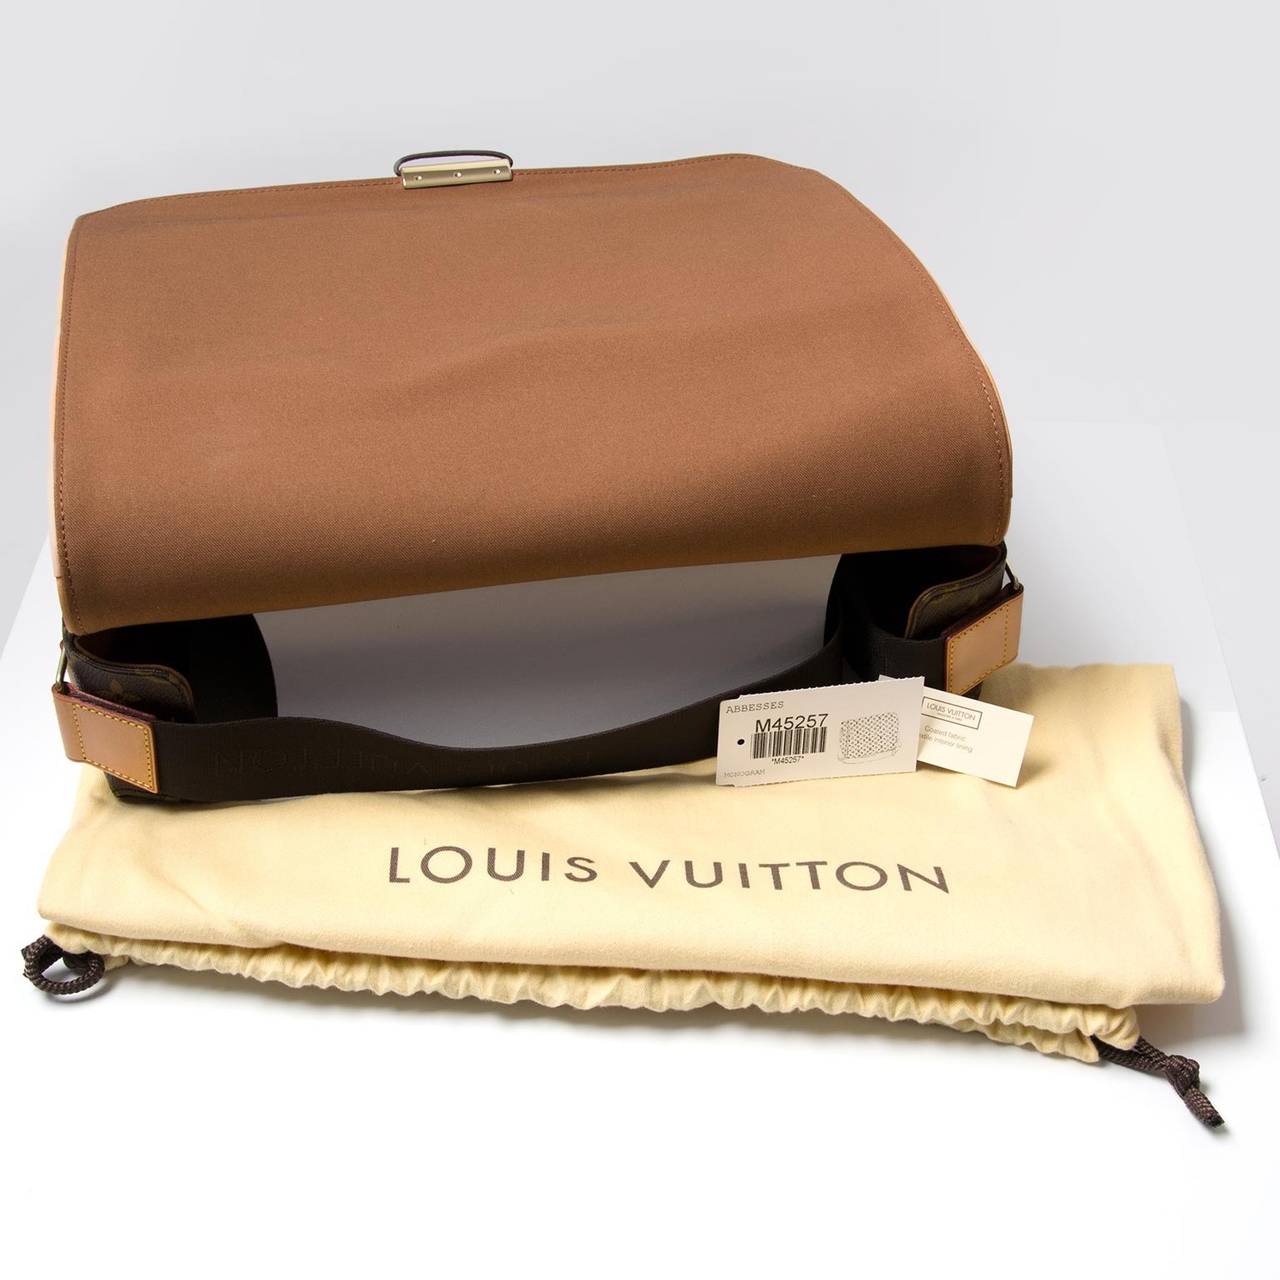 Louis Vuitton Valmy Pochette Crossbody Bag | Confederated Tribes of the Umatilla Indian Reservation